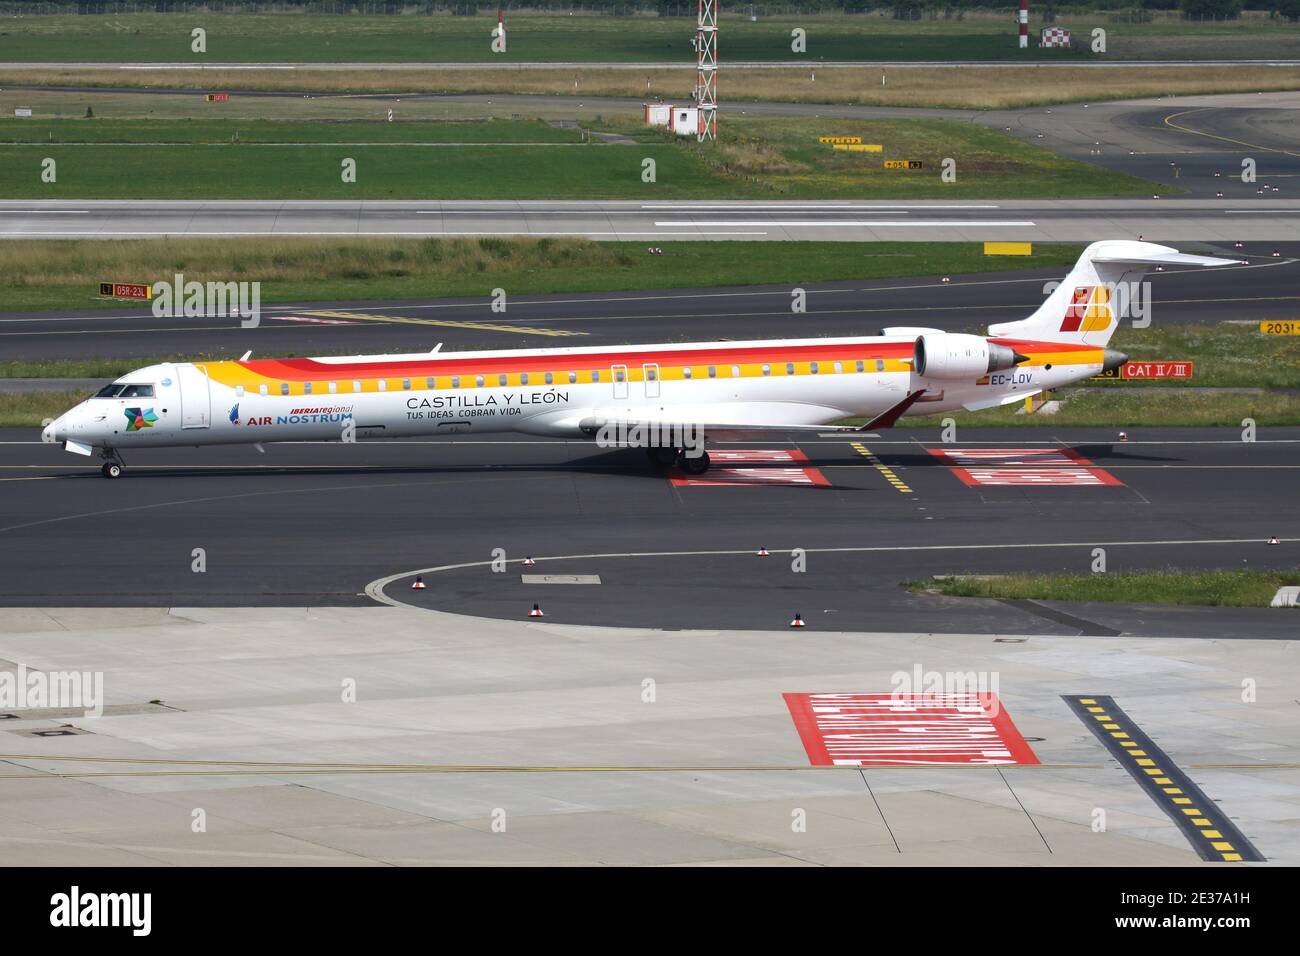 Air Nostrum Bombardier CRJ1000 in Iberia Regional livery with registration EC-LOV on taxiway at Dusseldorf Airport. Stock Photo